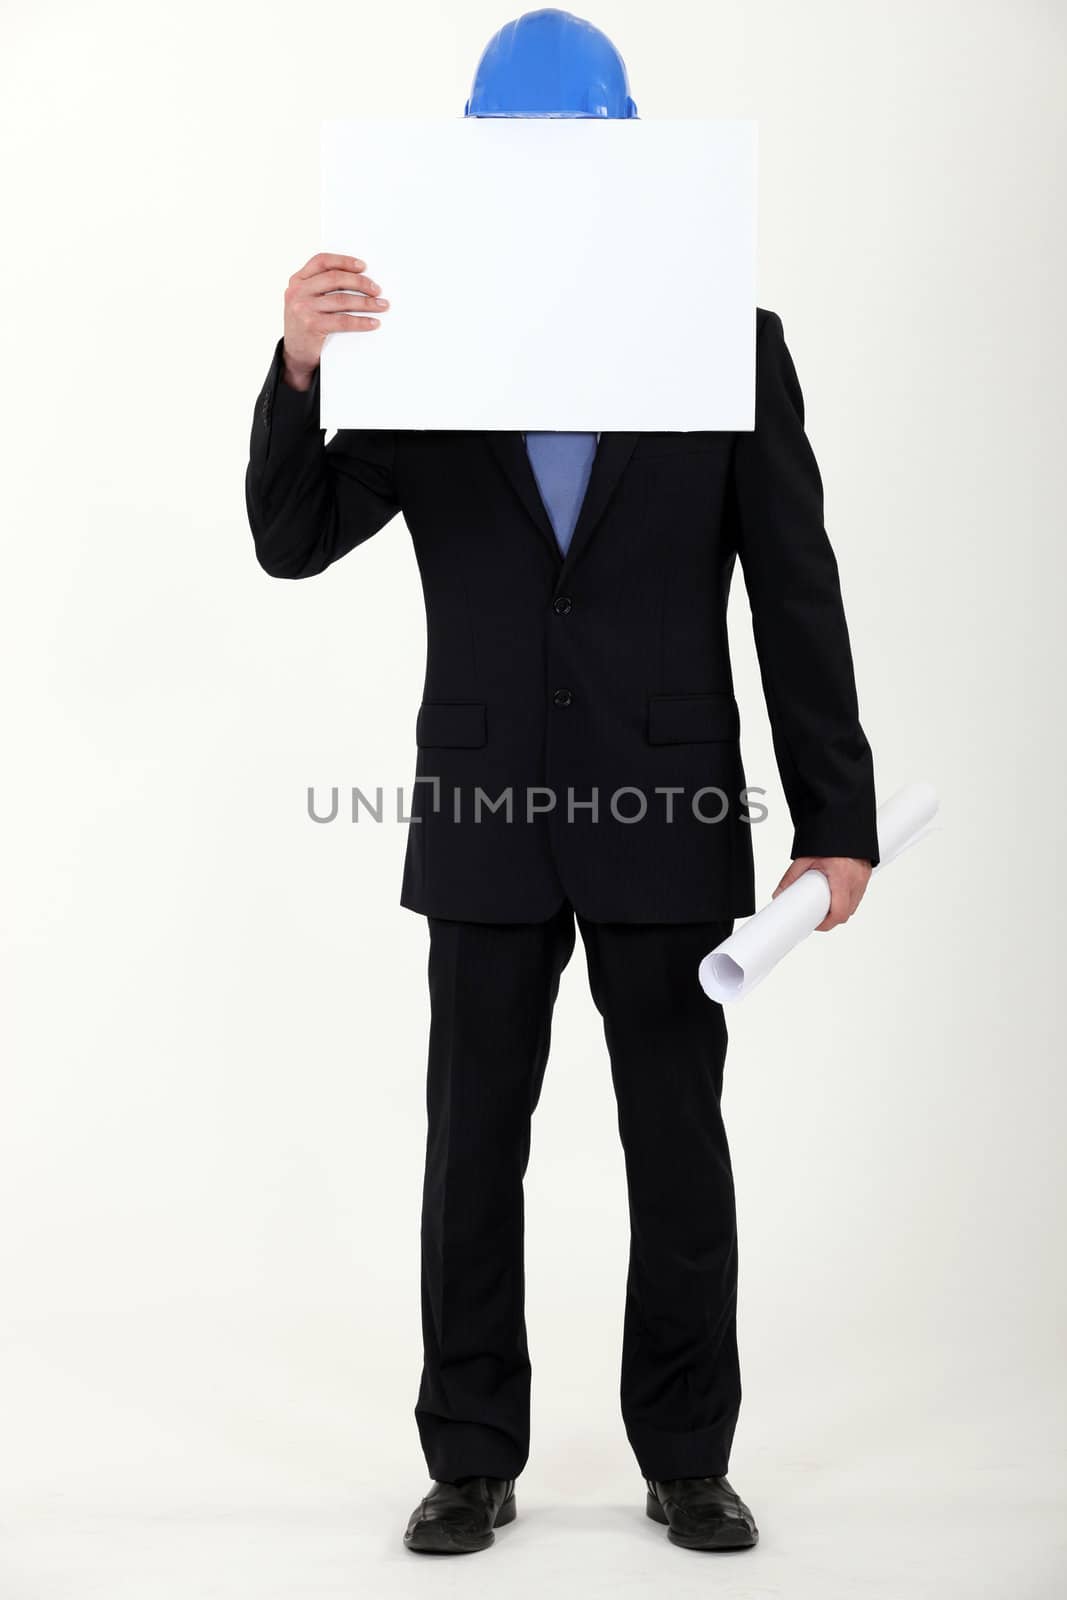 Engineer covering his face with a blank sign by phovoir